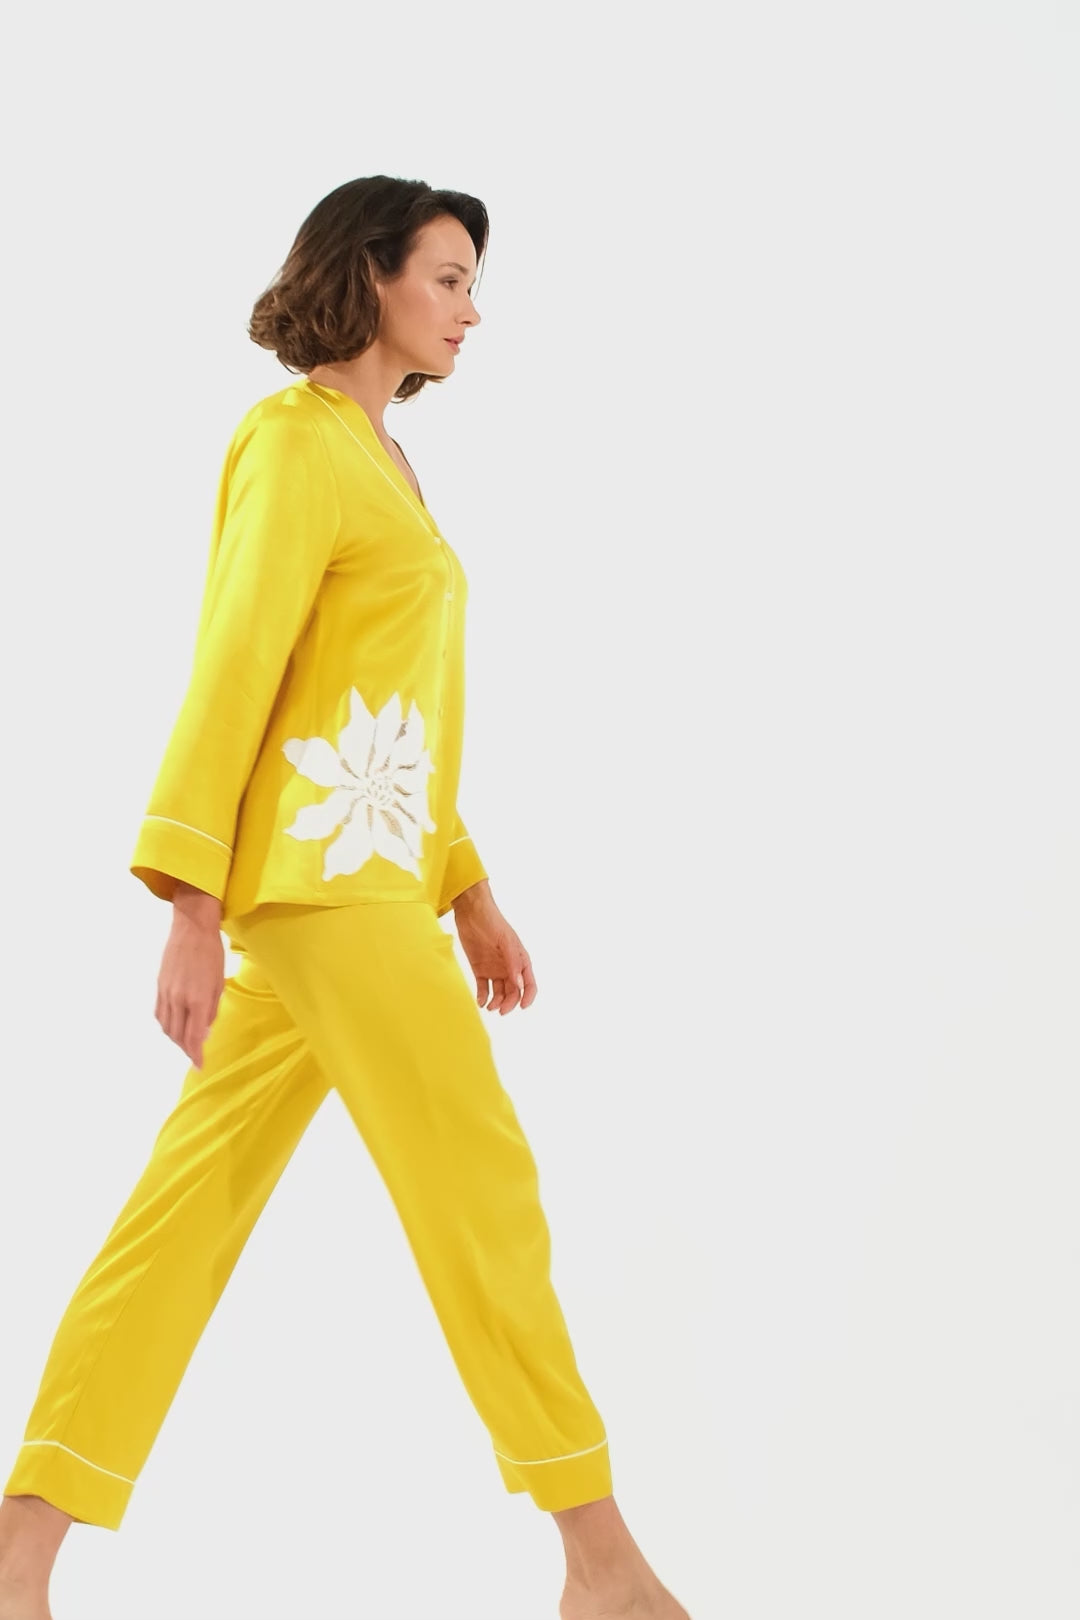 Belladonna Trimmed Rayon and Buttoned Long Sleeve Pyjama Set - Yellow